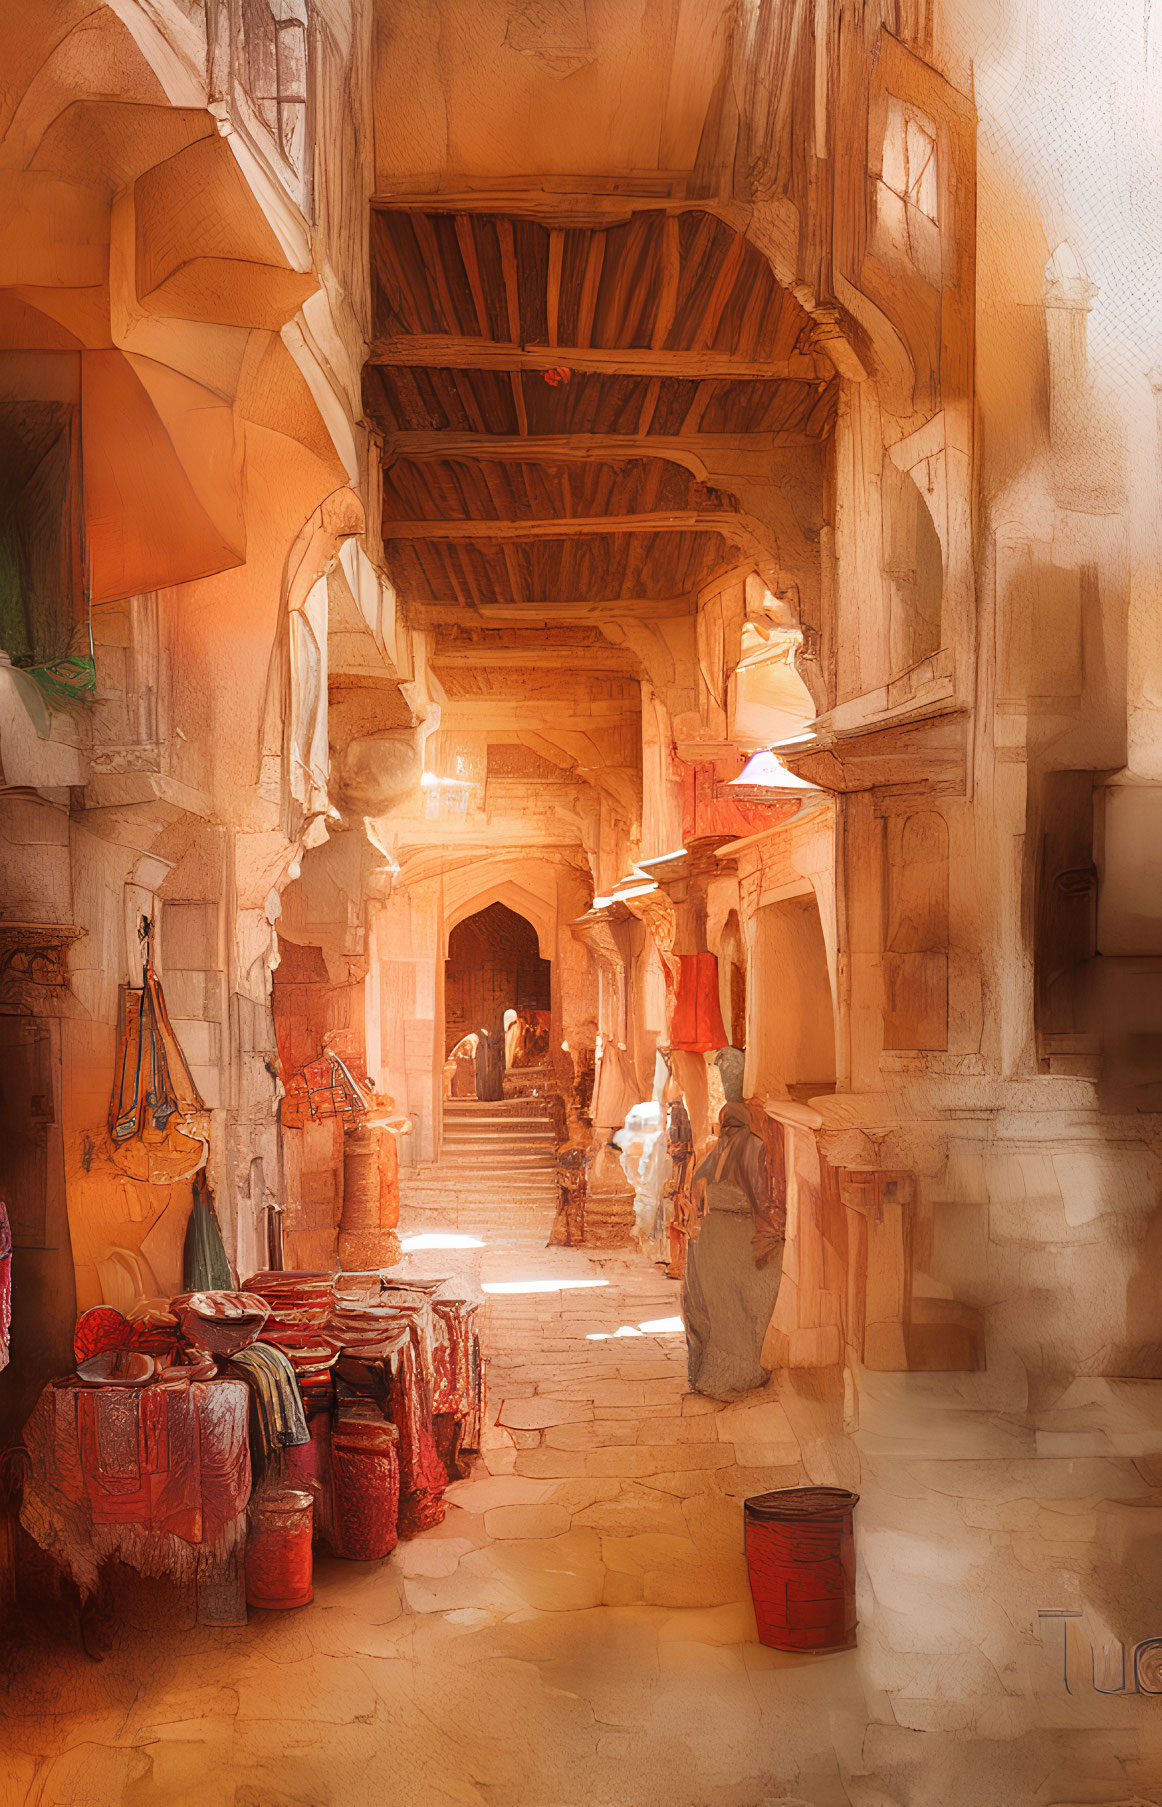 Vibrant market alley scene with textiles, wooden beams, and bustling crowd.